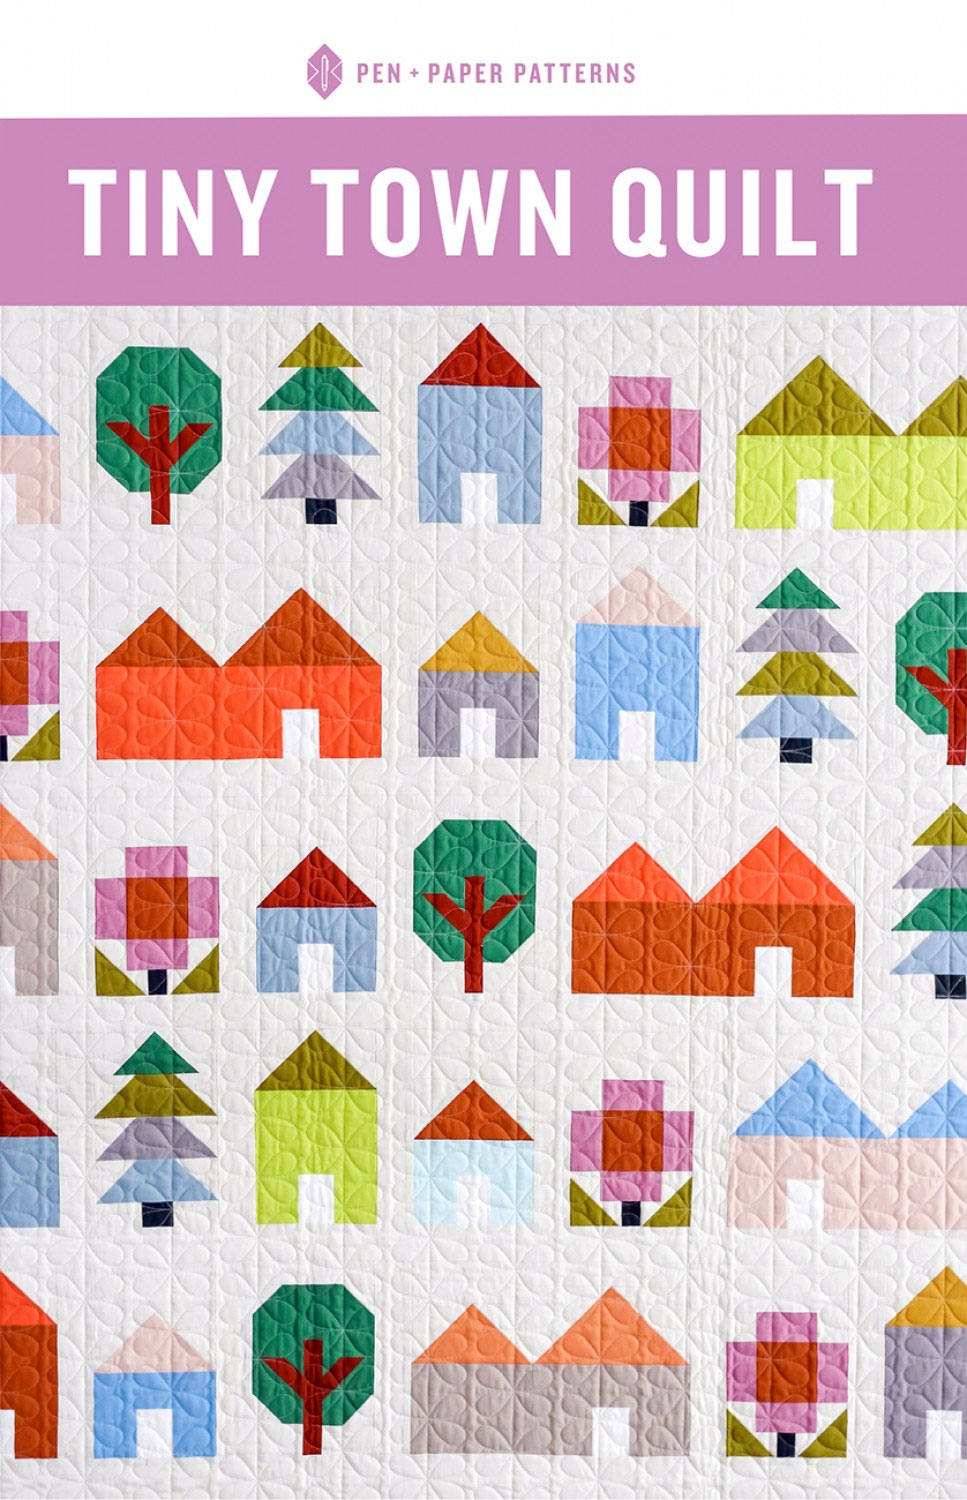 Tiny-Town-quilt-sewing-pattern-from-Pen-plus-paper-patterns-front